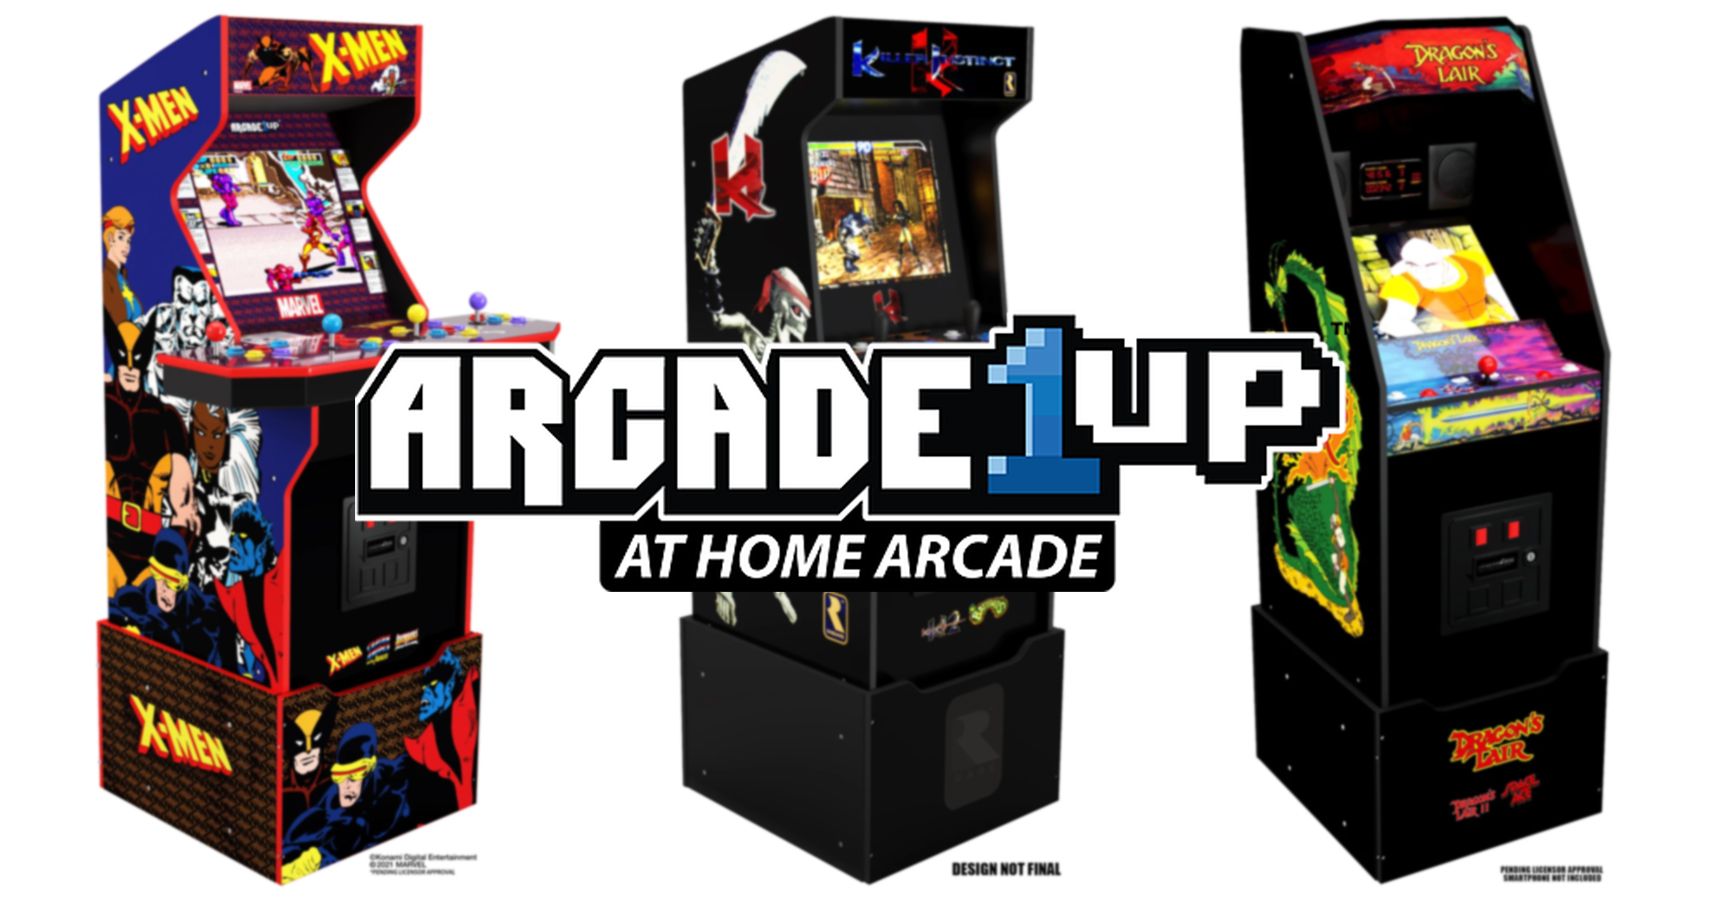 Arcade1up S Next Cabinets Include Killer Instinct X Men And Dragon S Lair